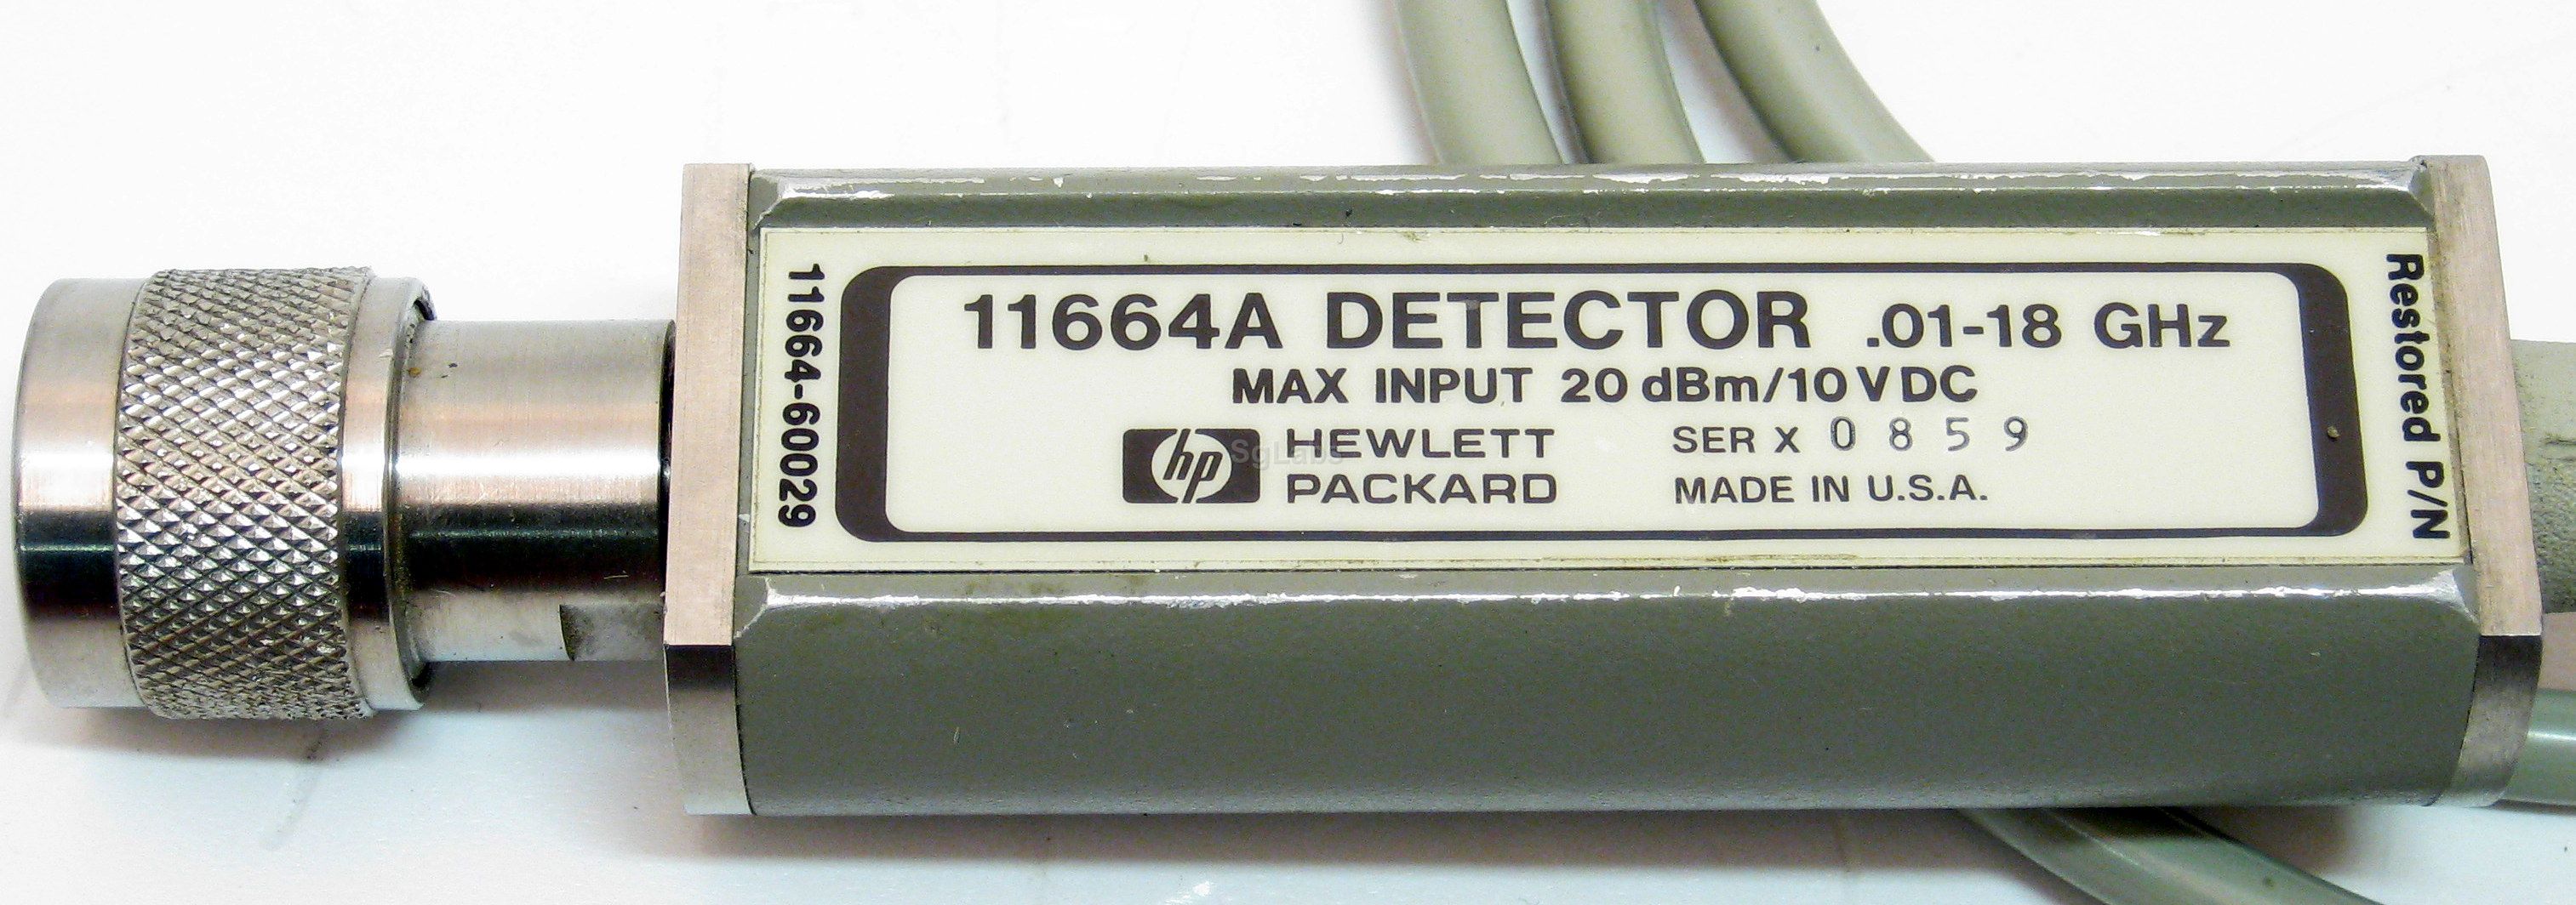 HP Agilent Keysight 11664A Detector 100mhz to 18ghz for sale online 